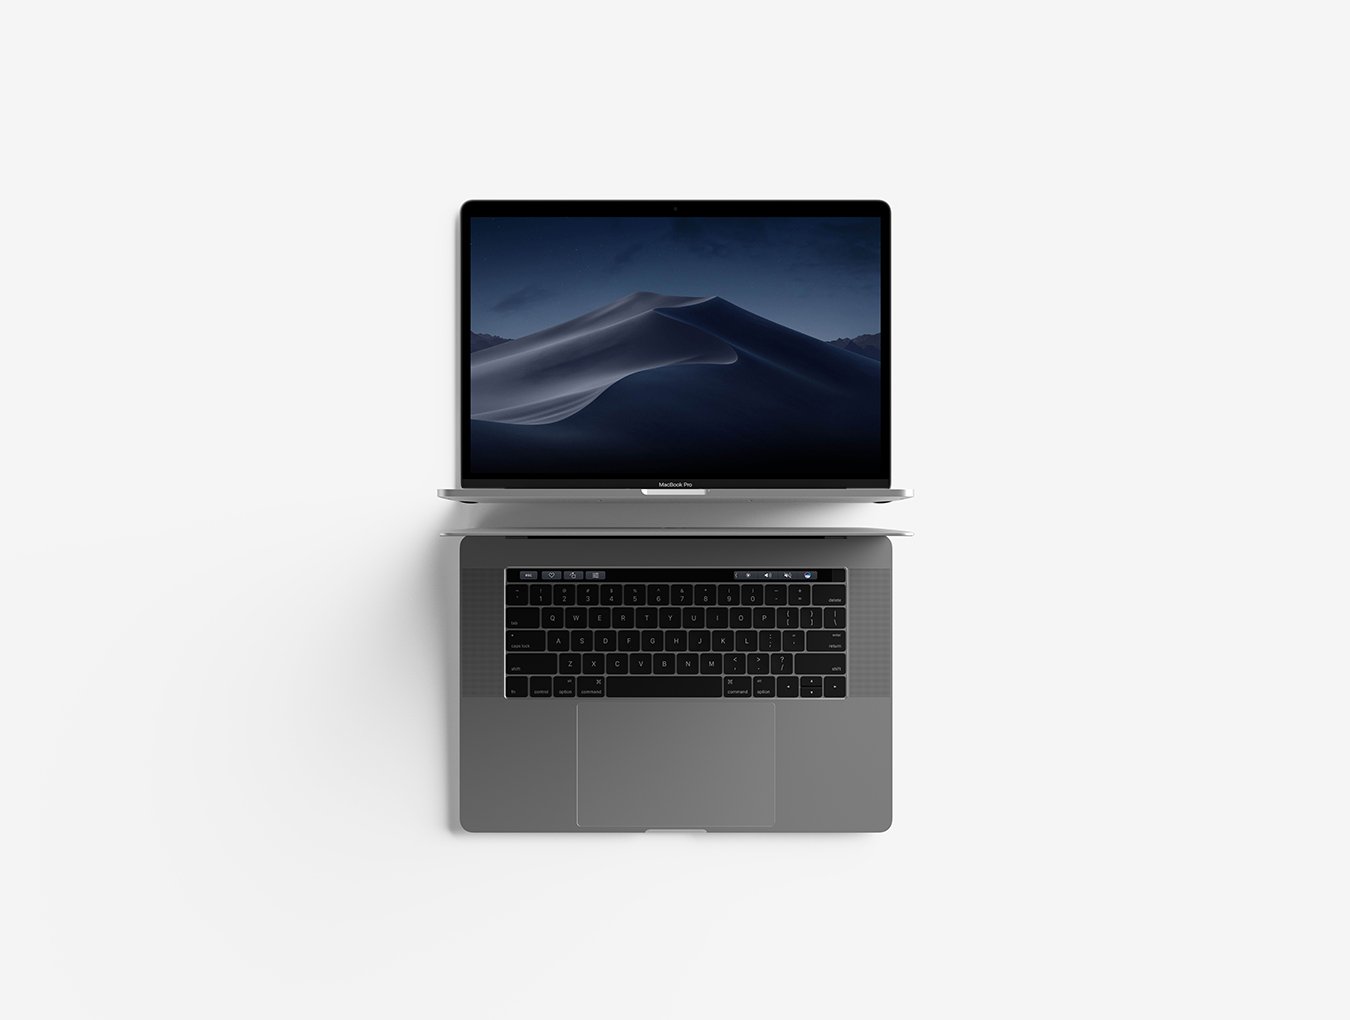 modern_top_view_macbook_pro_mockup_by_anthony_boyd_graphics_(7)_1533138669240.jpg